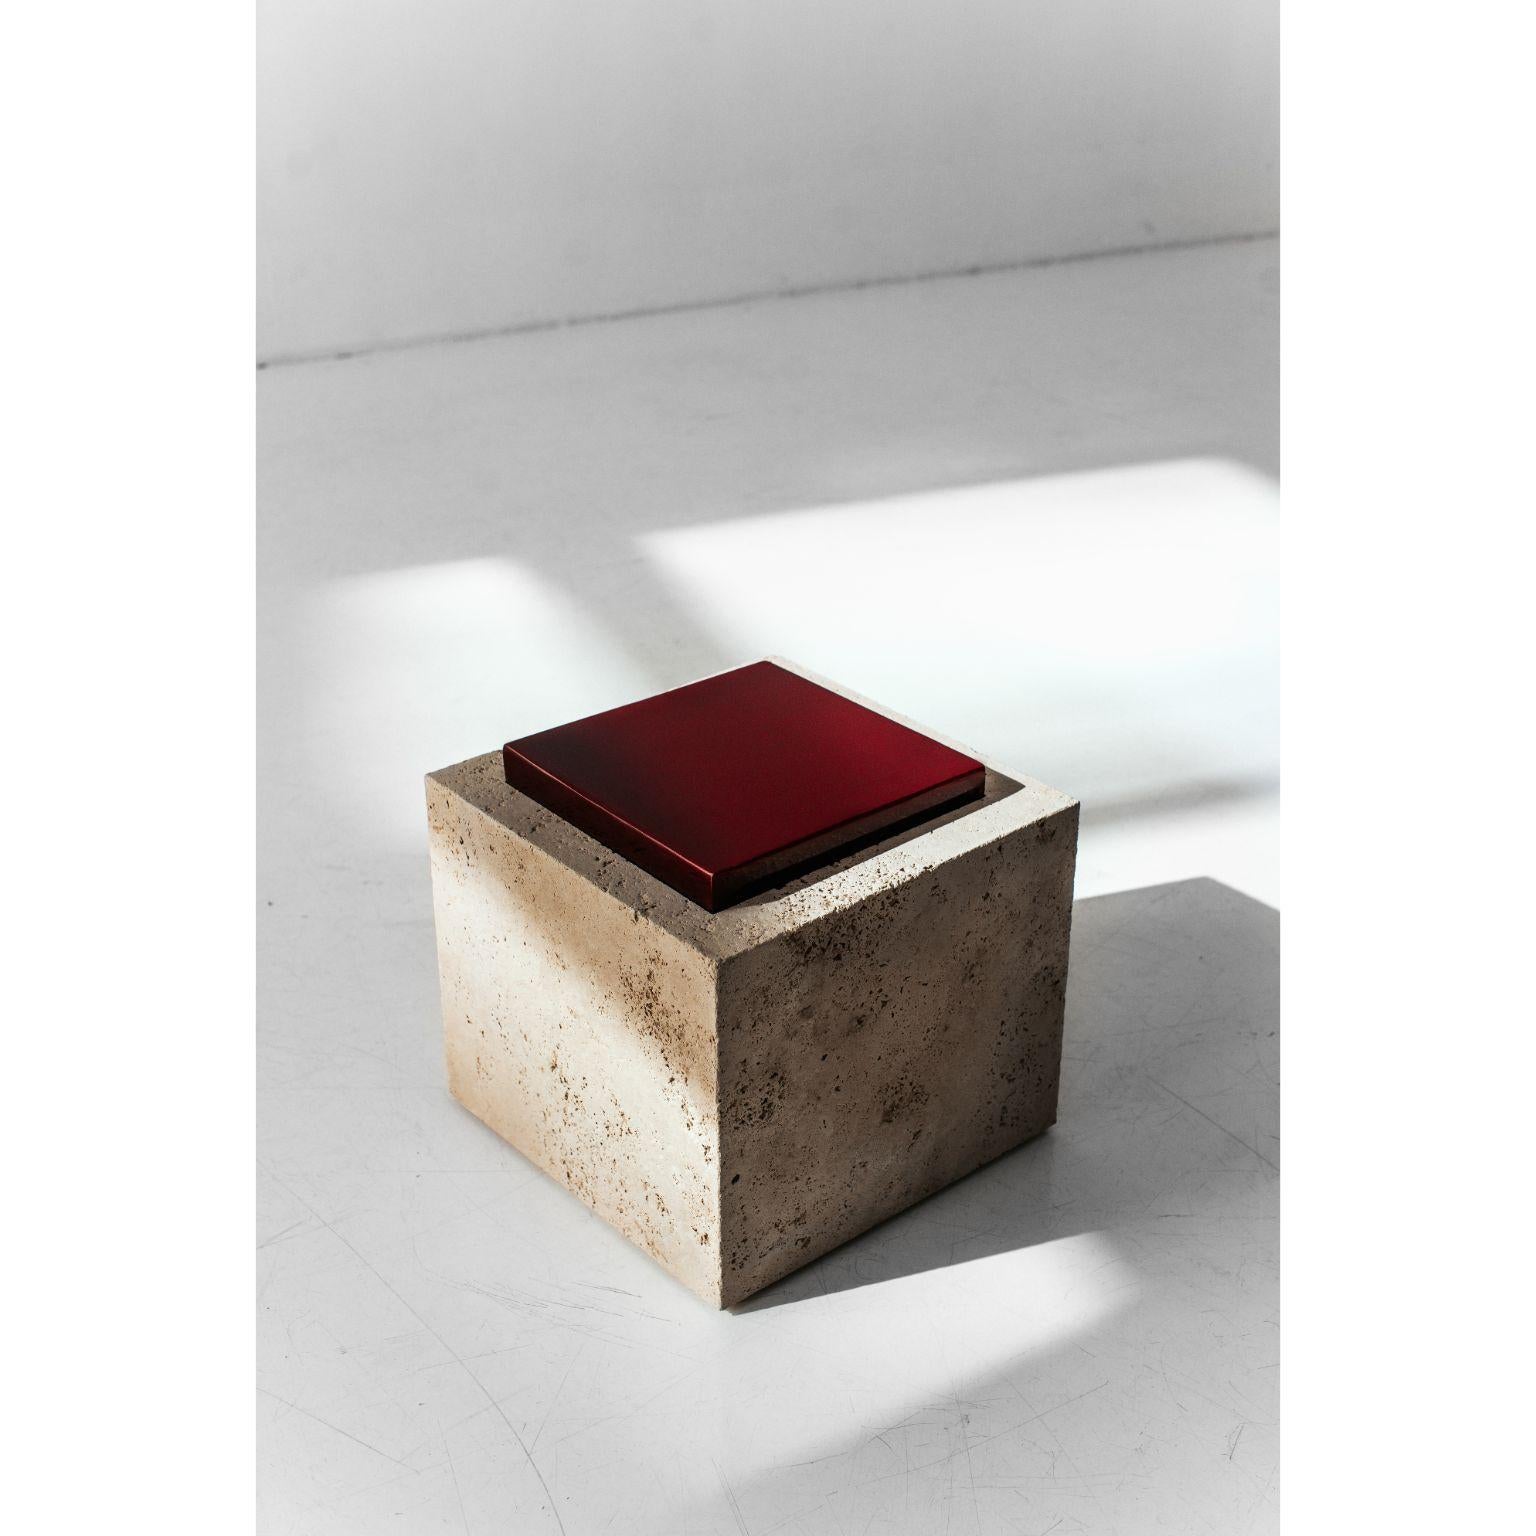 LUI side table by Ira Boyko
Dimentions: D 42 x W 42 x H 42 cm
Materials: Glass, Stone travertine classic light cross-cut.

«RED SQUARE» by ?. malevich became a starting point for me in the process of creating my collection. it definitely has